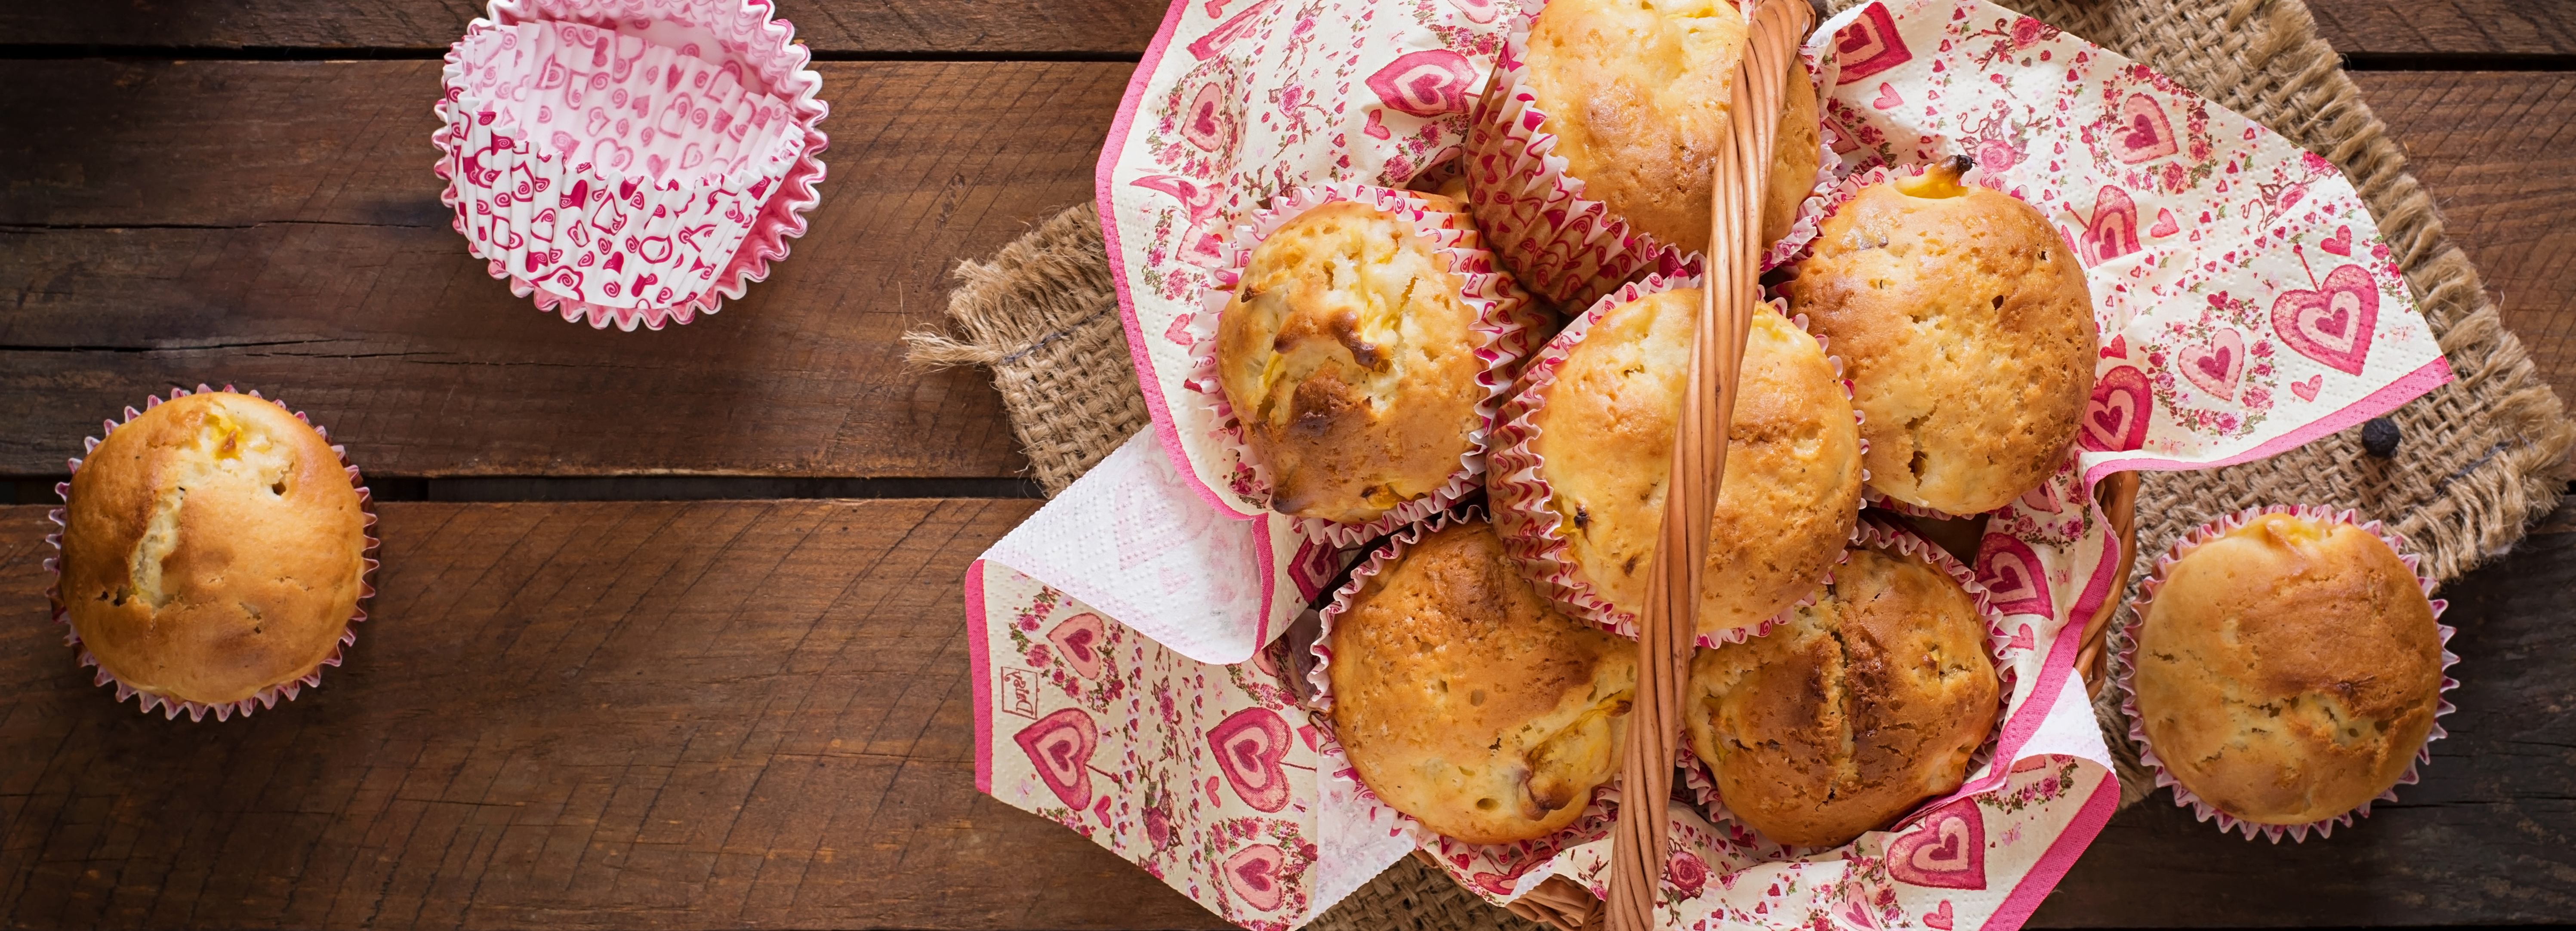 fruit-muffins-with-nutmeg-allspice-wooden-table